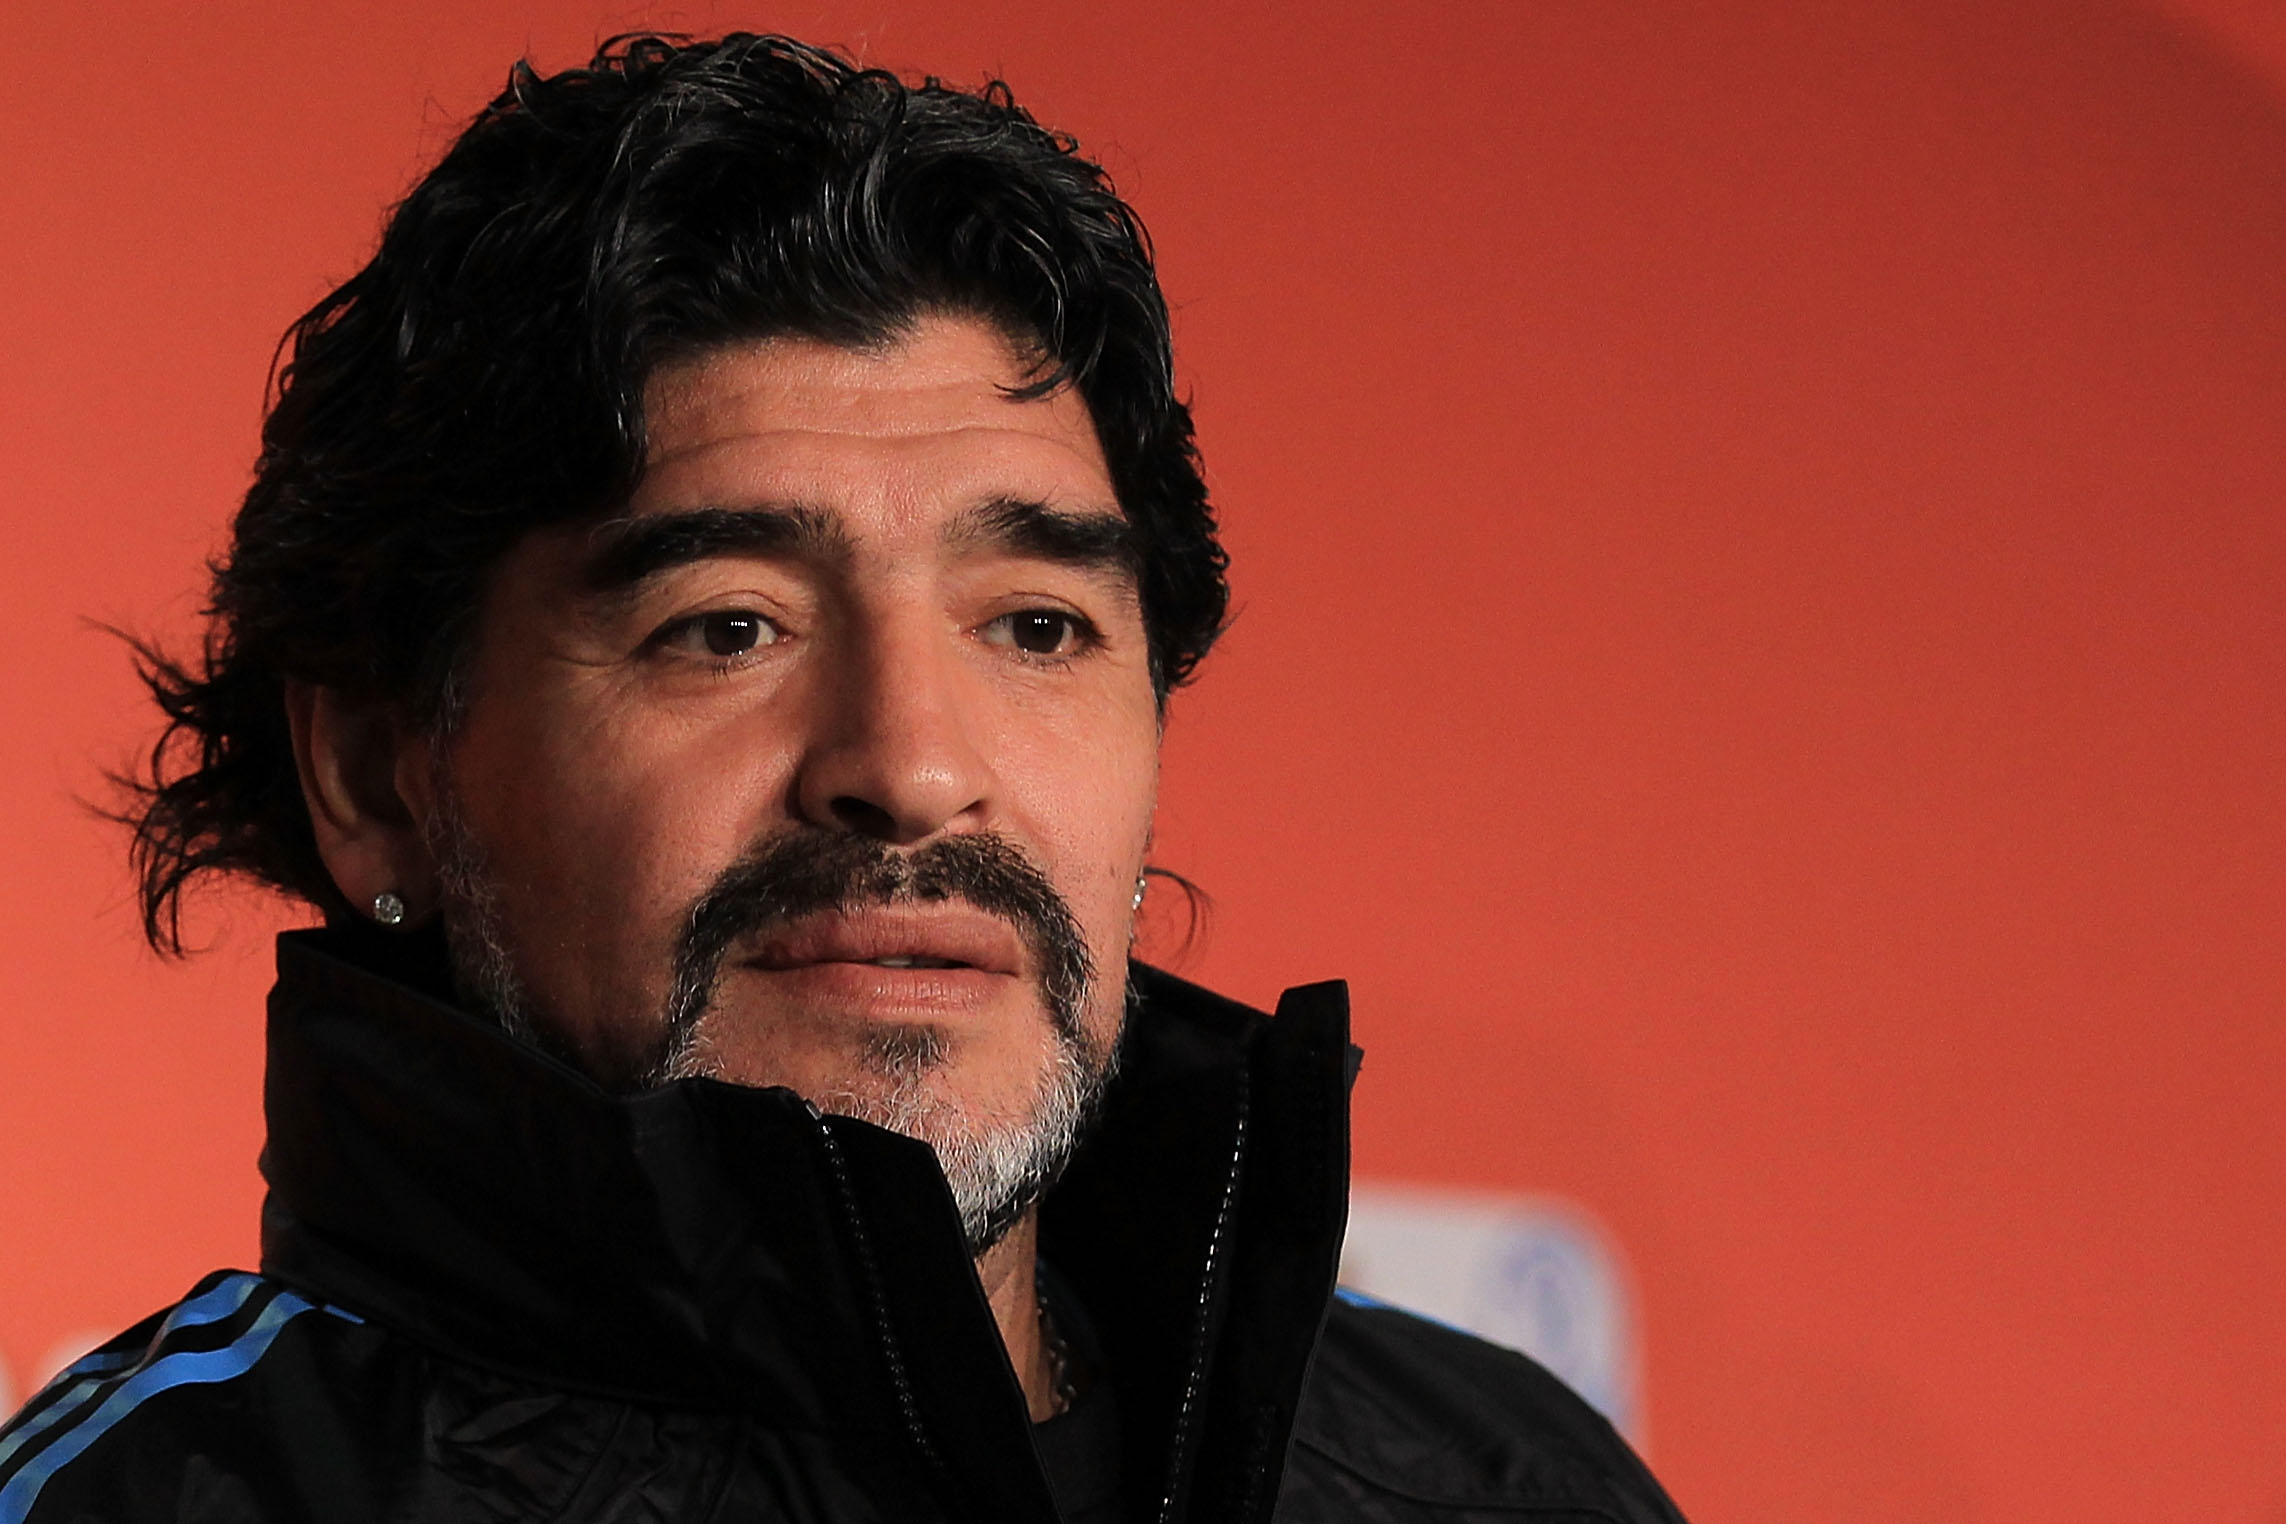 Soccer legend Diego Maradona has passed away at the age of 60